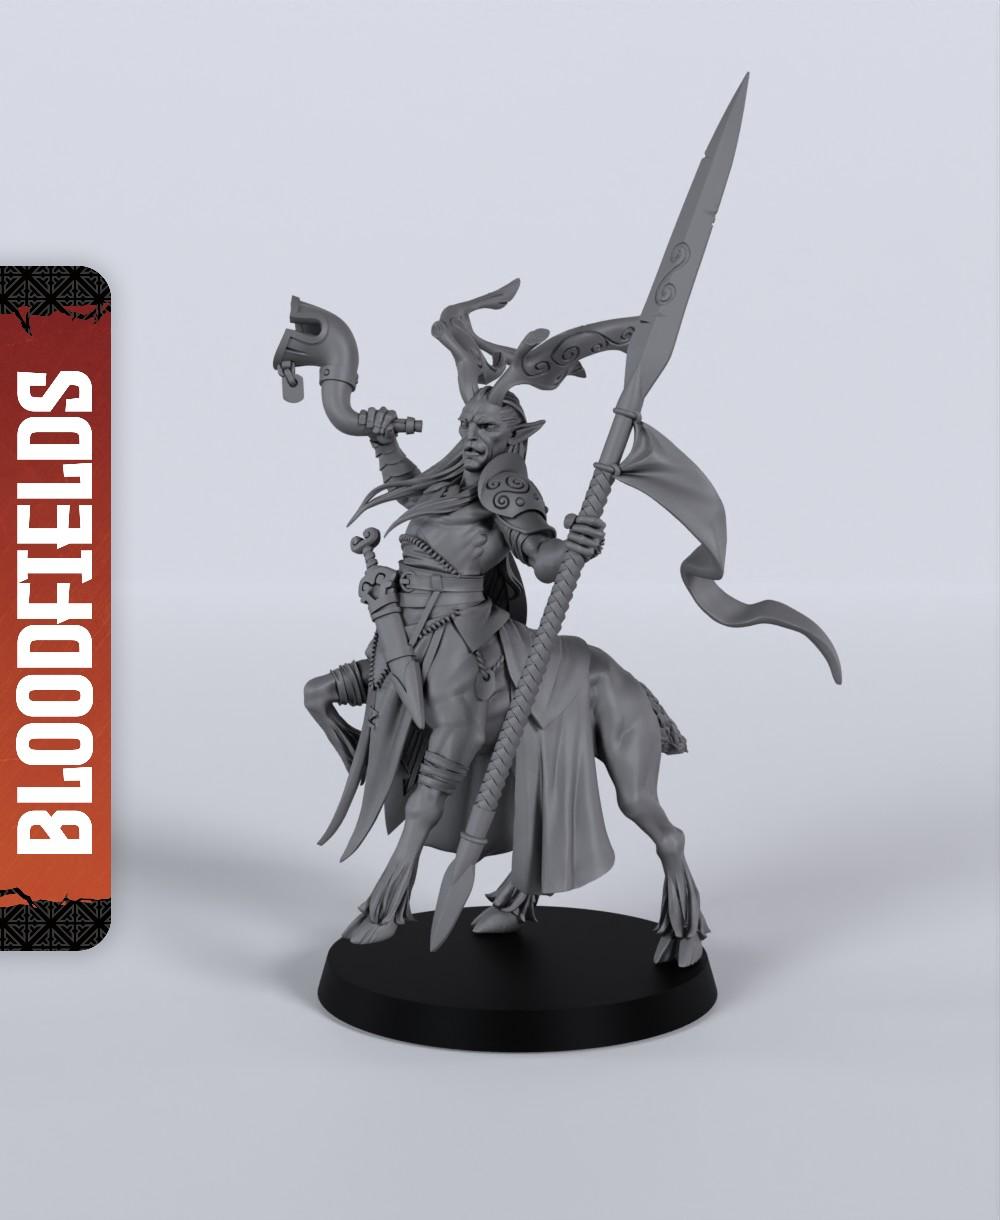 Radran Stonekeeper - With Free Dragon Warhammer - 5e DnD Inspired for RPG and Wargamers 3d model